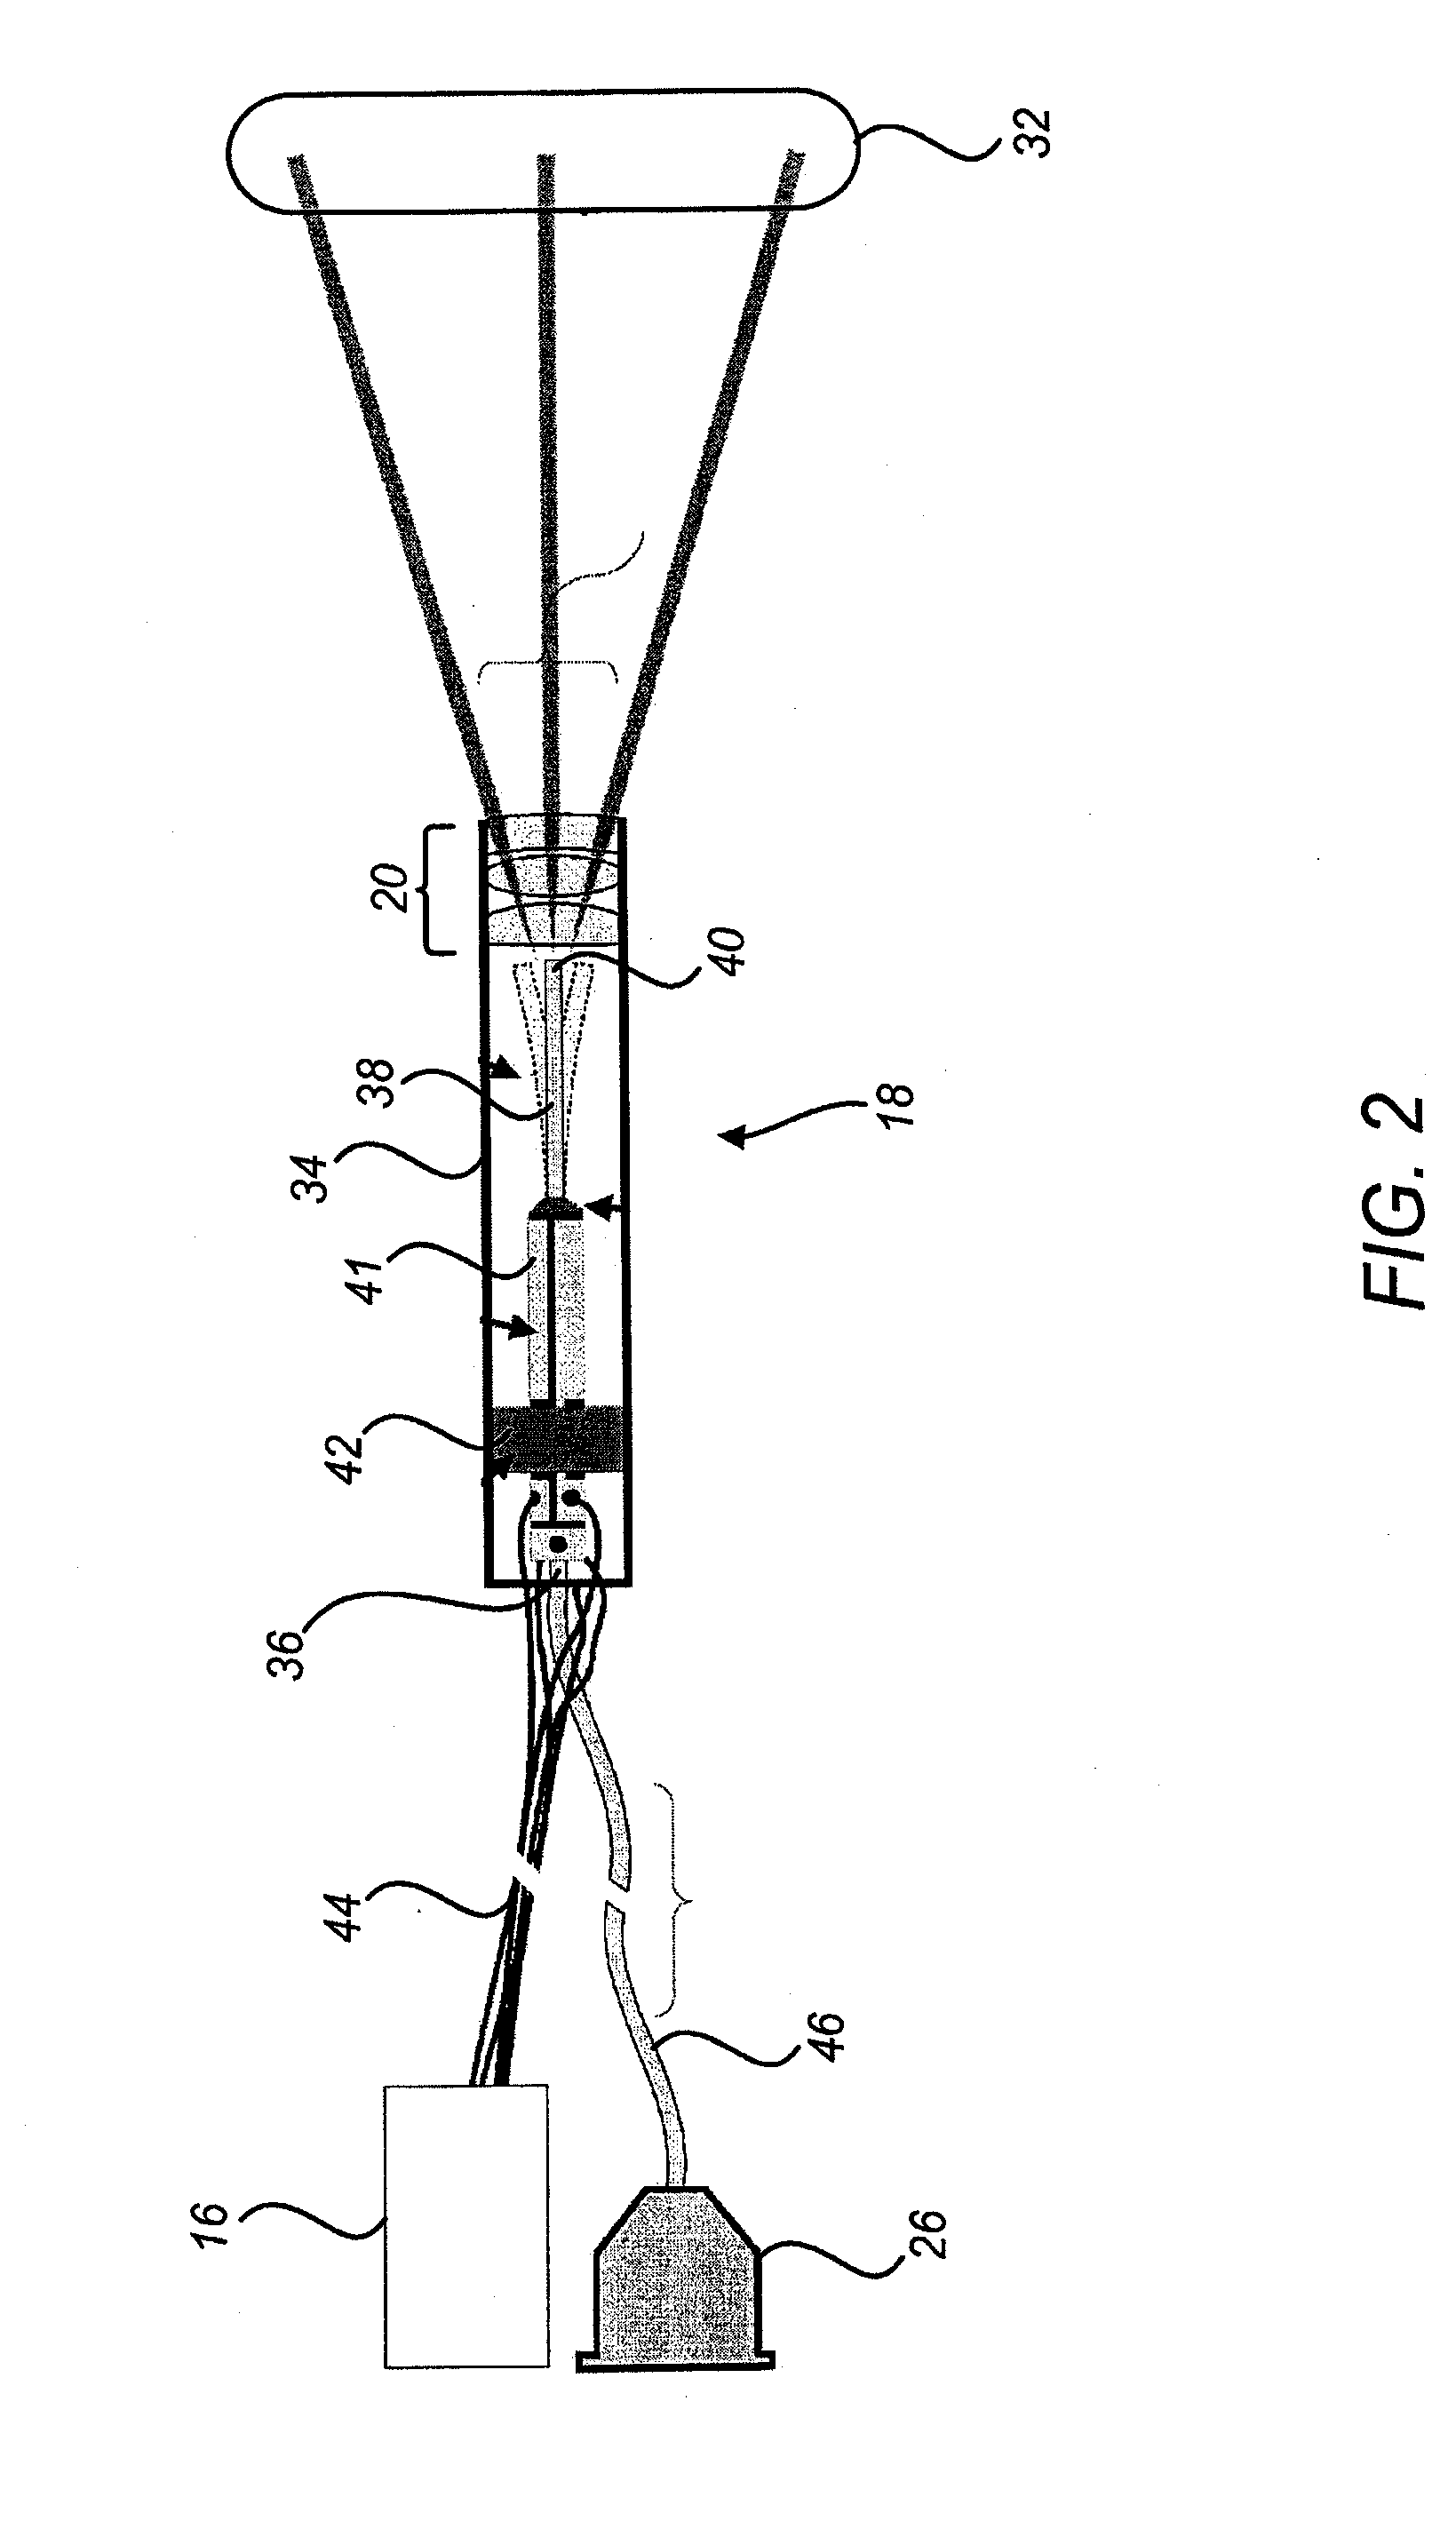 Scanning laser projection display devices and methods for projecting one or more images onto a surface with light-scanning optical fiber